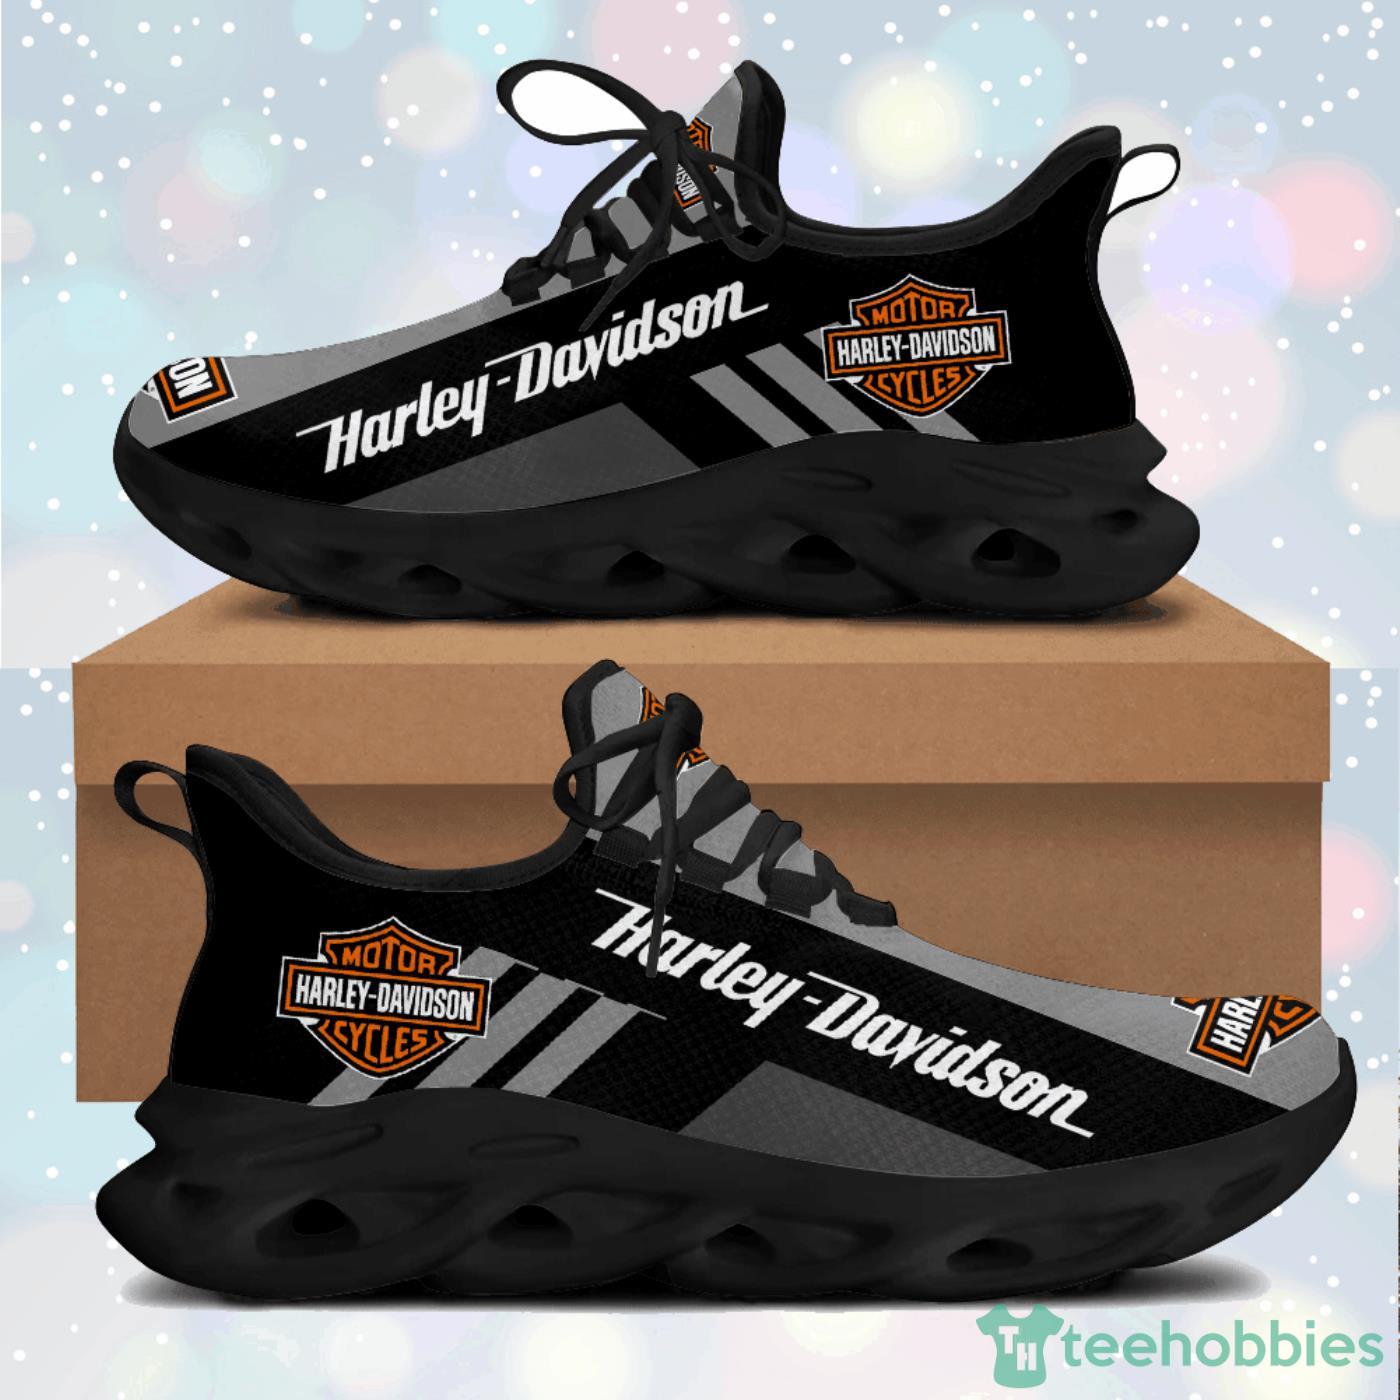 Harley Davidson Max Soul Sneaker Black Running Shoes Product Photo 1